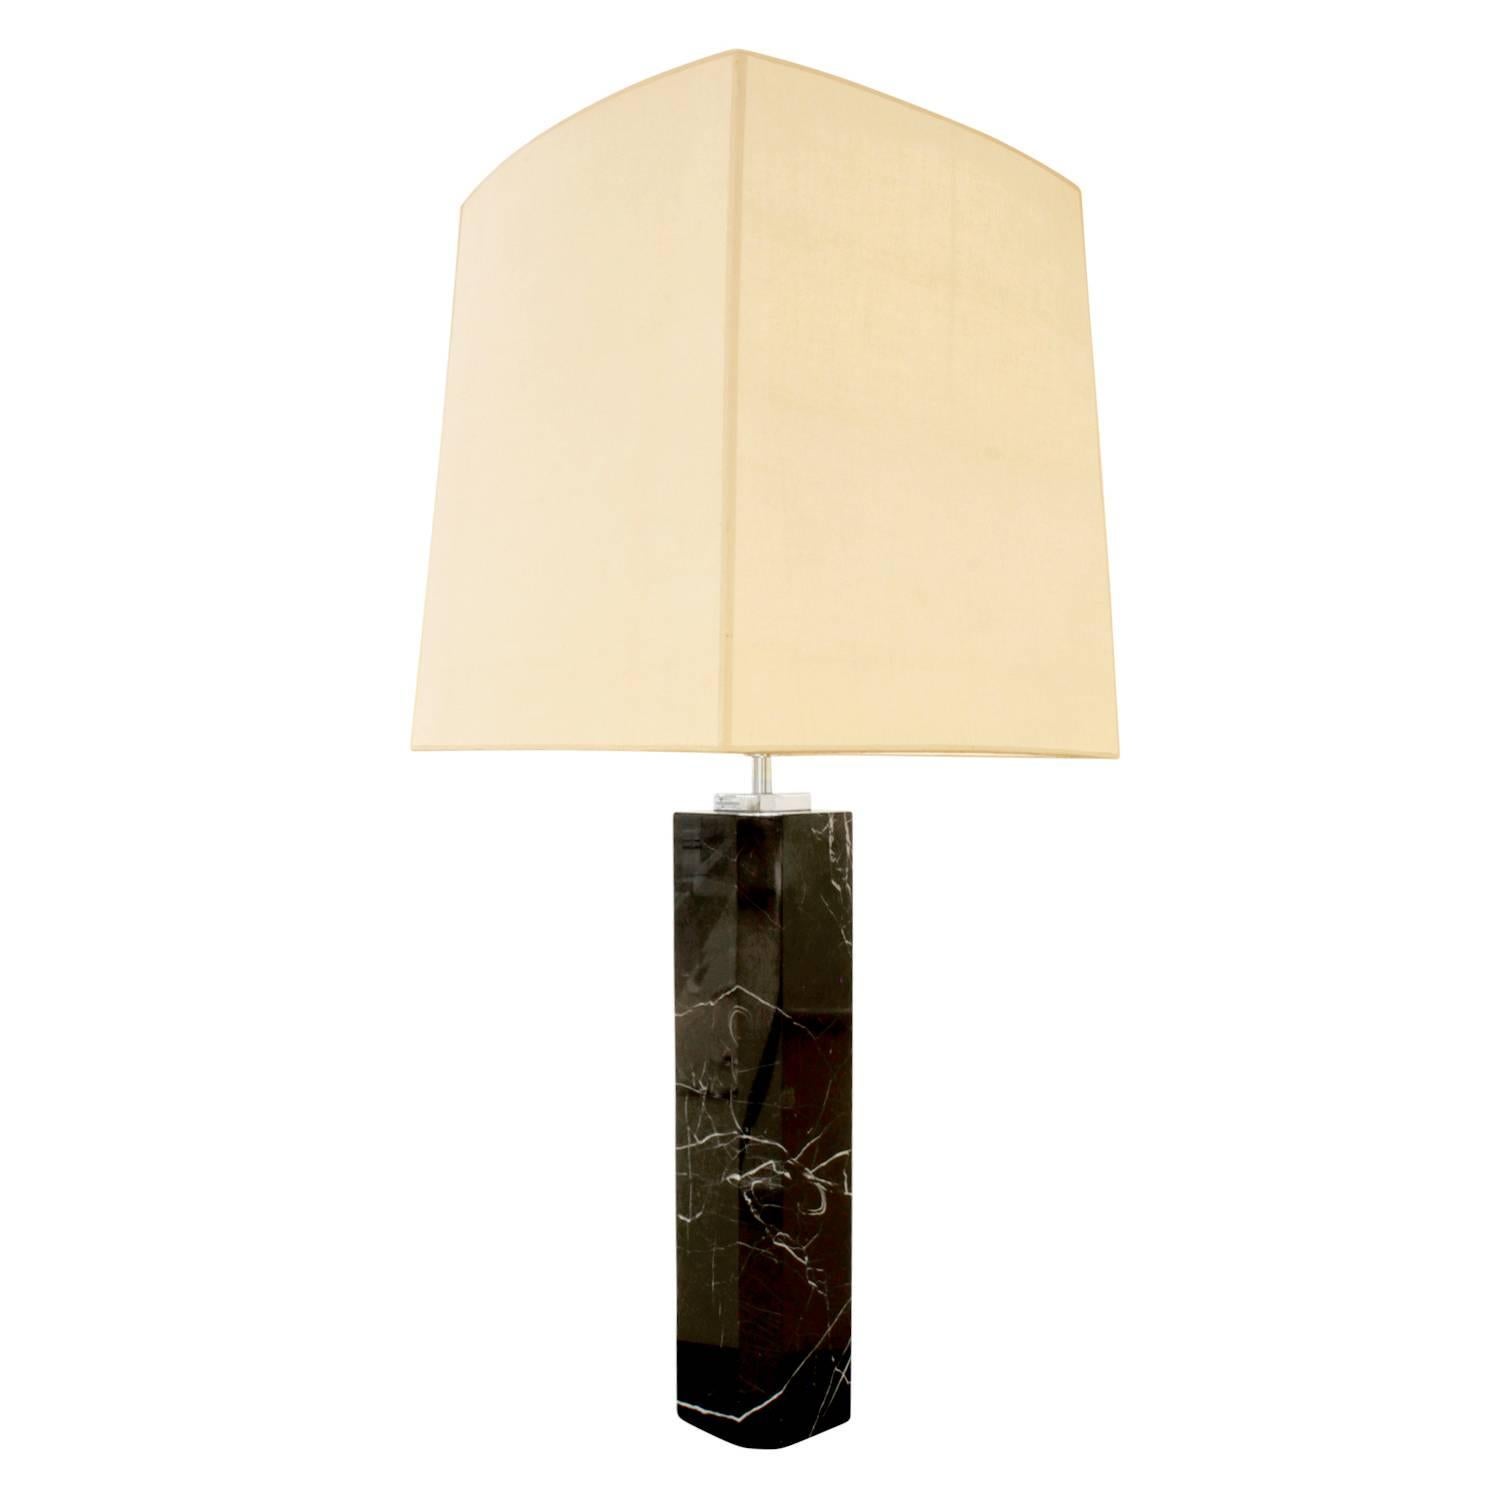 Elegant table lamp in black figured marble with three bulbs and patented spin switch by Hansen Lighting, American, 1960s.

Shade
W 14 inches
D 14 inches 
H 16 inches.